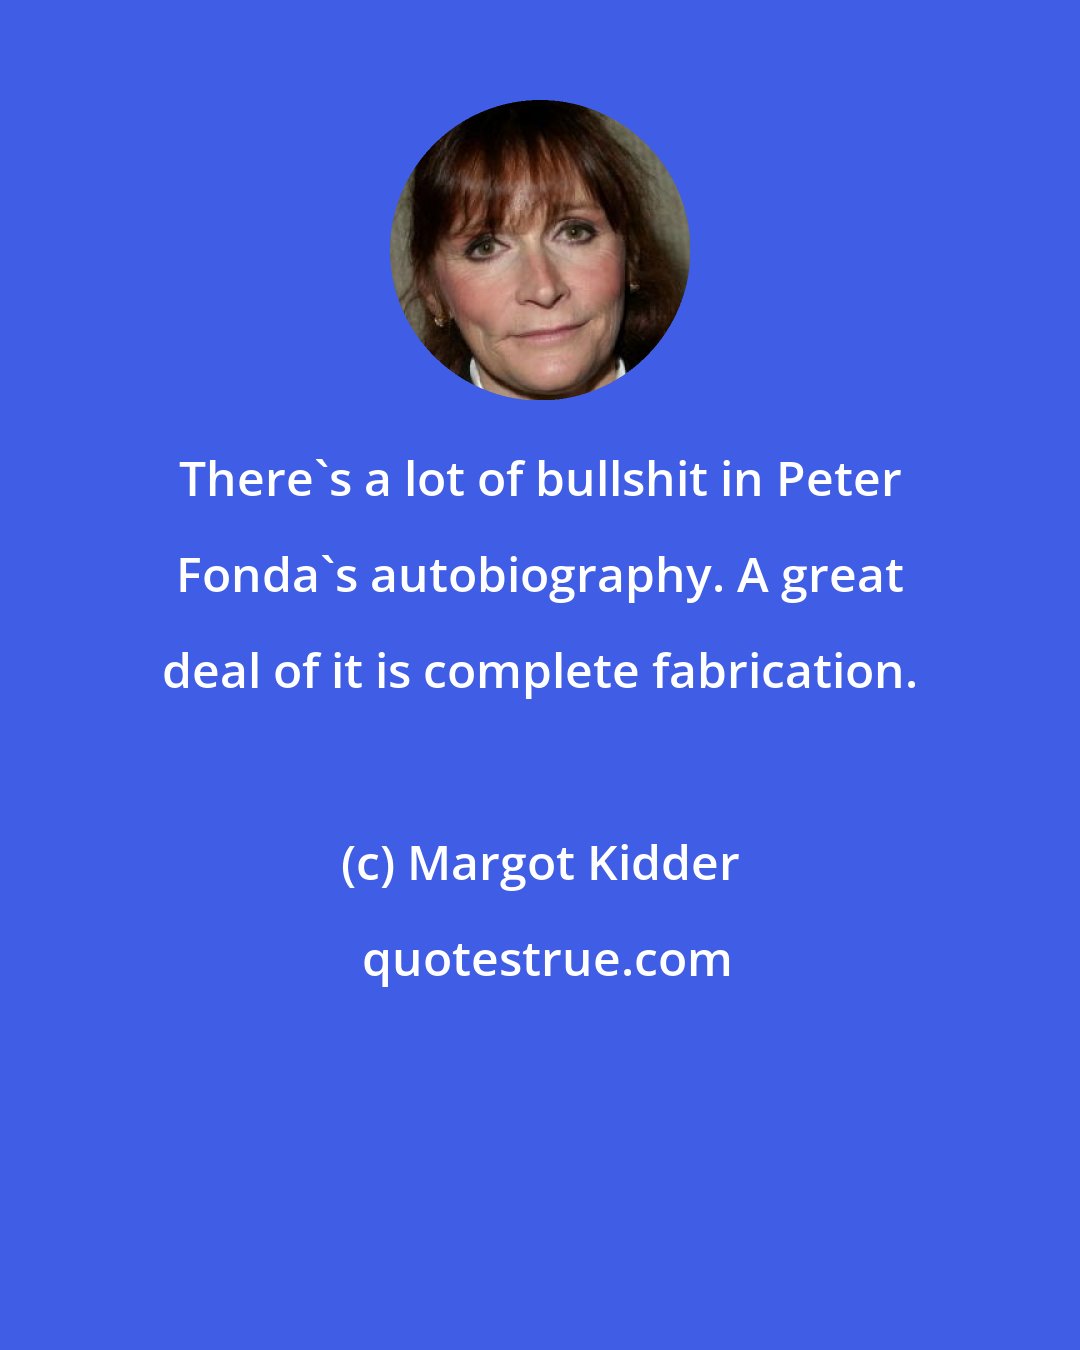 Margot Kidder: There's a lot of bullshit in Peter Fonda's autobiography. A great deal of it is complete fabrication.